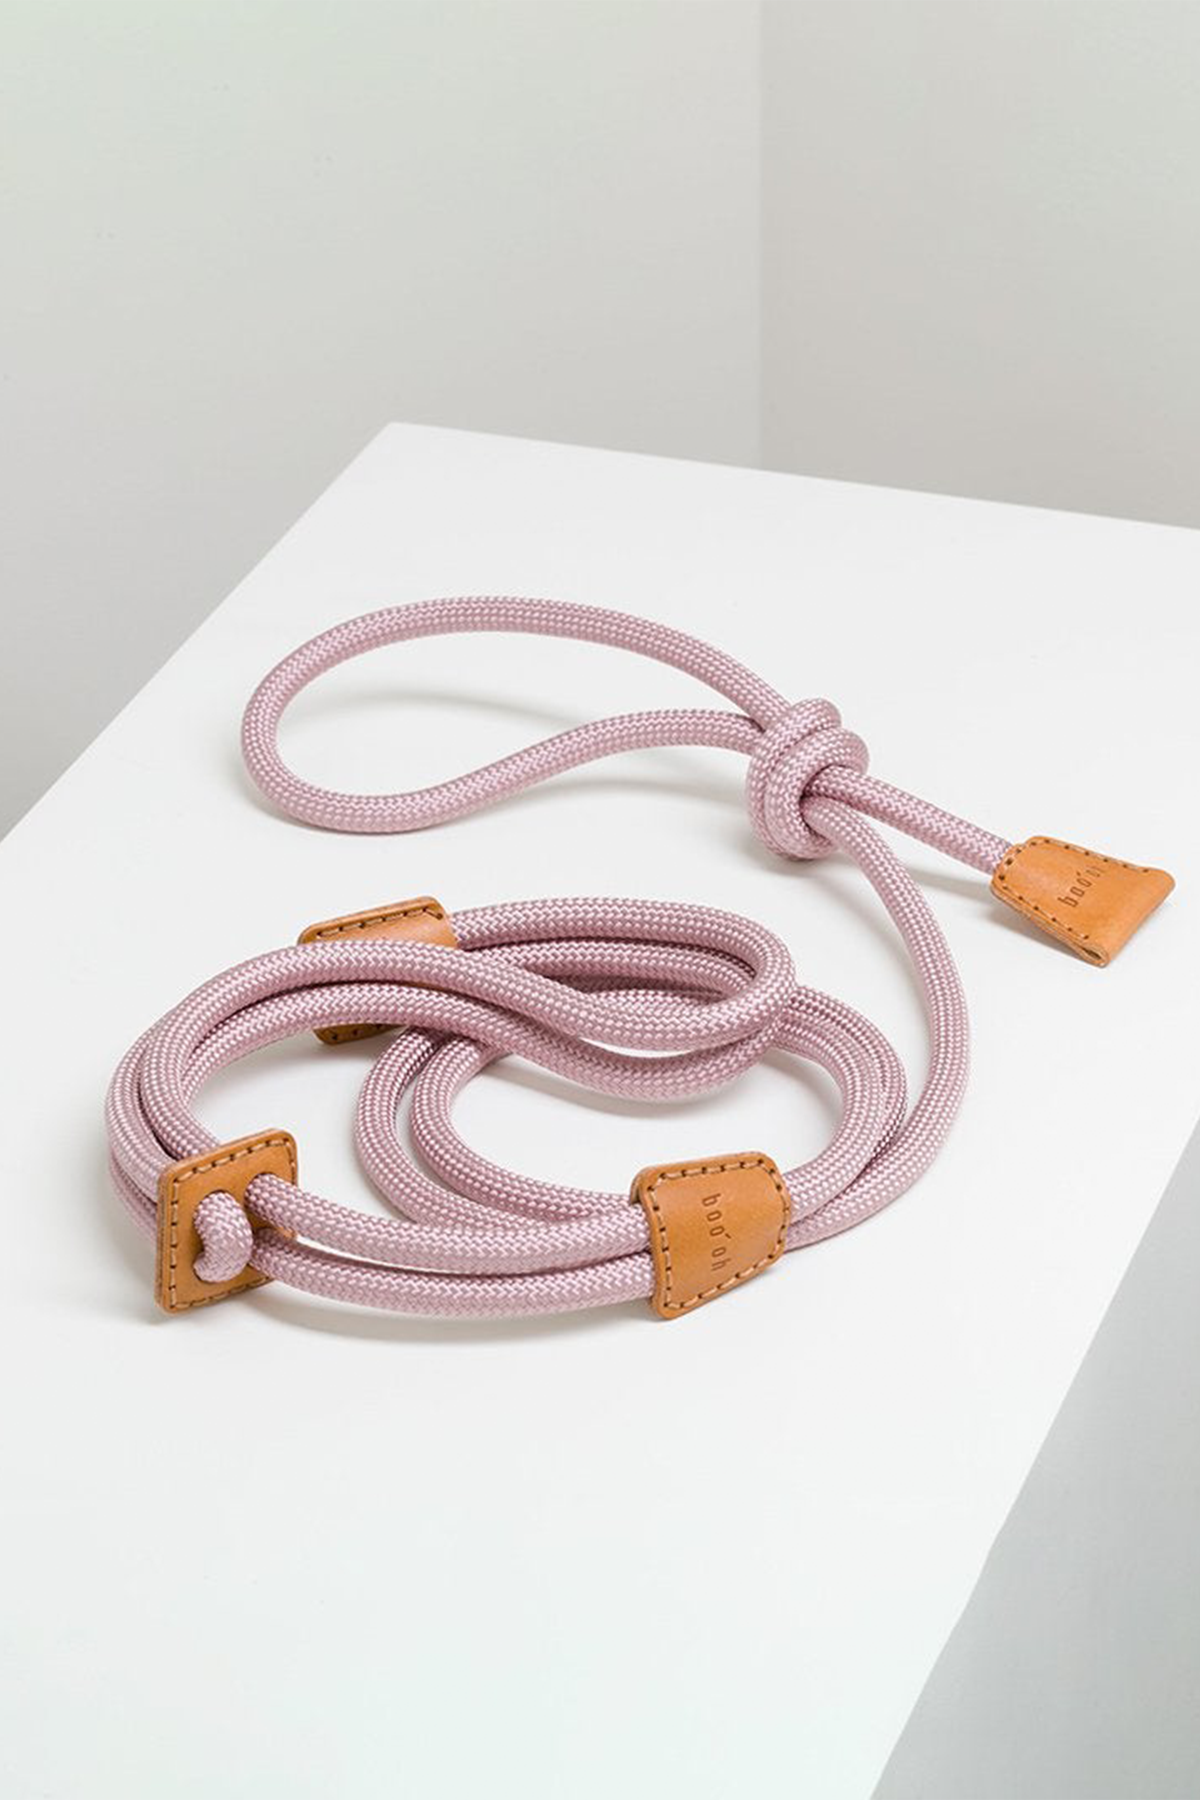 BOO OH | RAY ROPE HARNESS